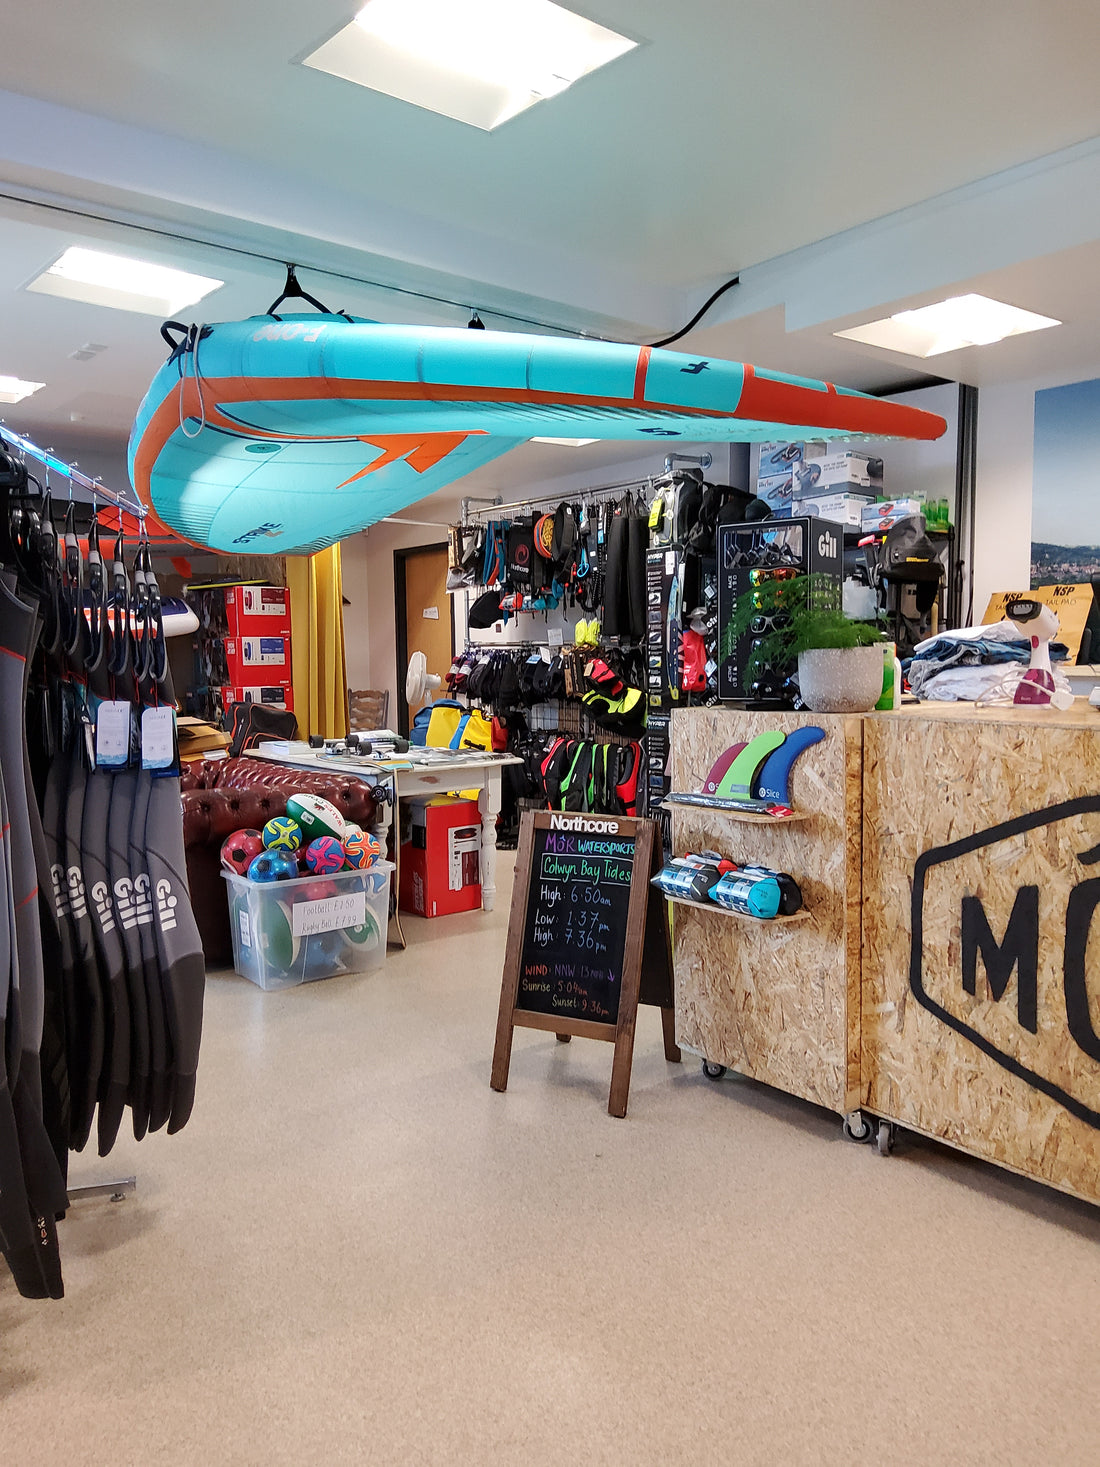 BENEFITS OF VISITING A STORE OVER SHOPPING ONLINE FOR A PADDLE BOARD